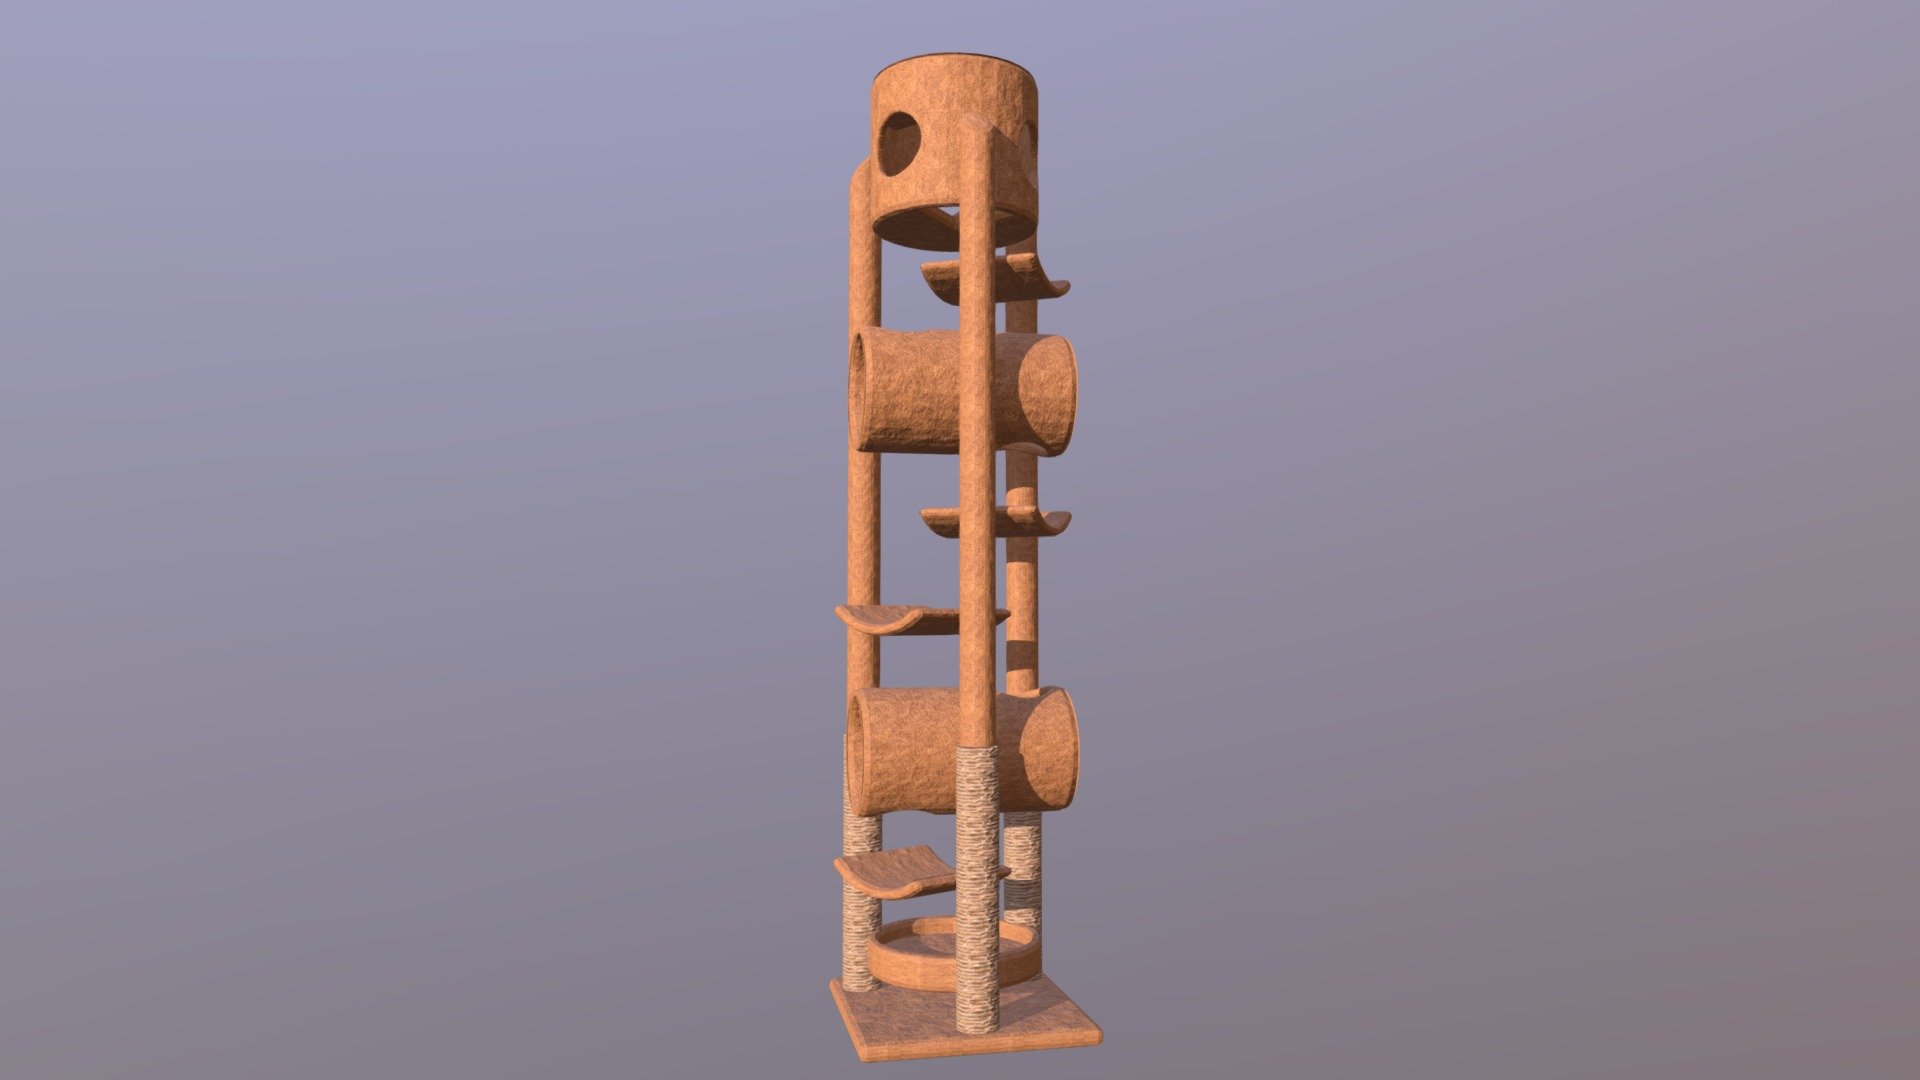 I made this cat tree in Blender for my Oculus Home. The textures were made in Substance Alchemy. Feel free to use it!
(Updated 8/5/19 to fix some issues) - Cat Tree - Download Free 3D model by Cartawampus 3d model